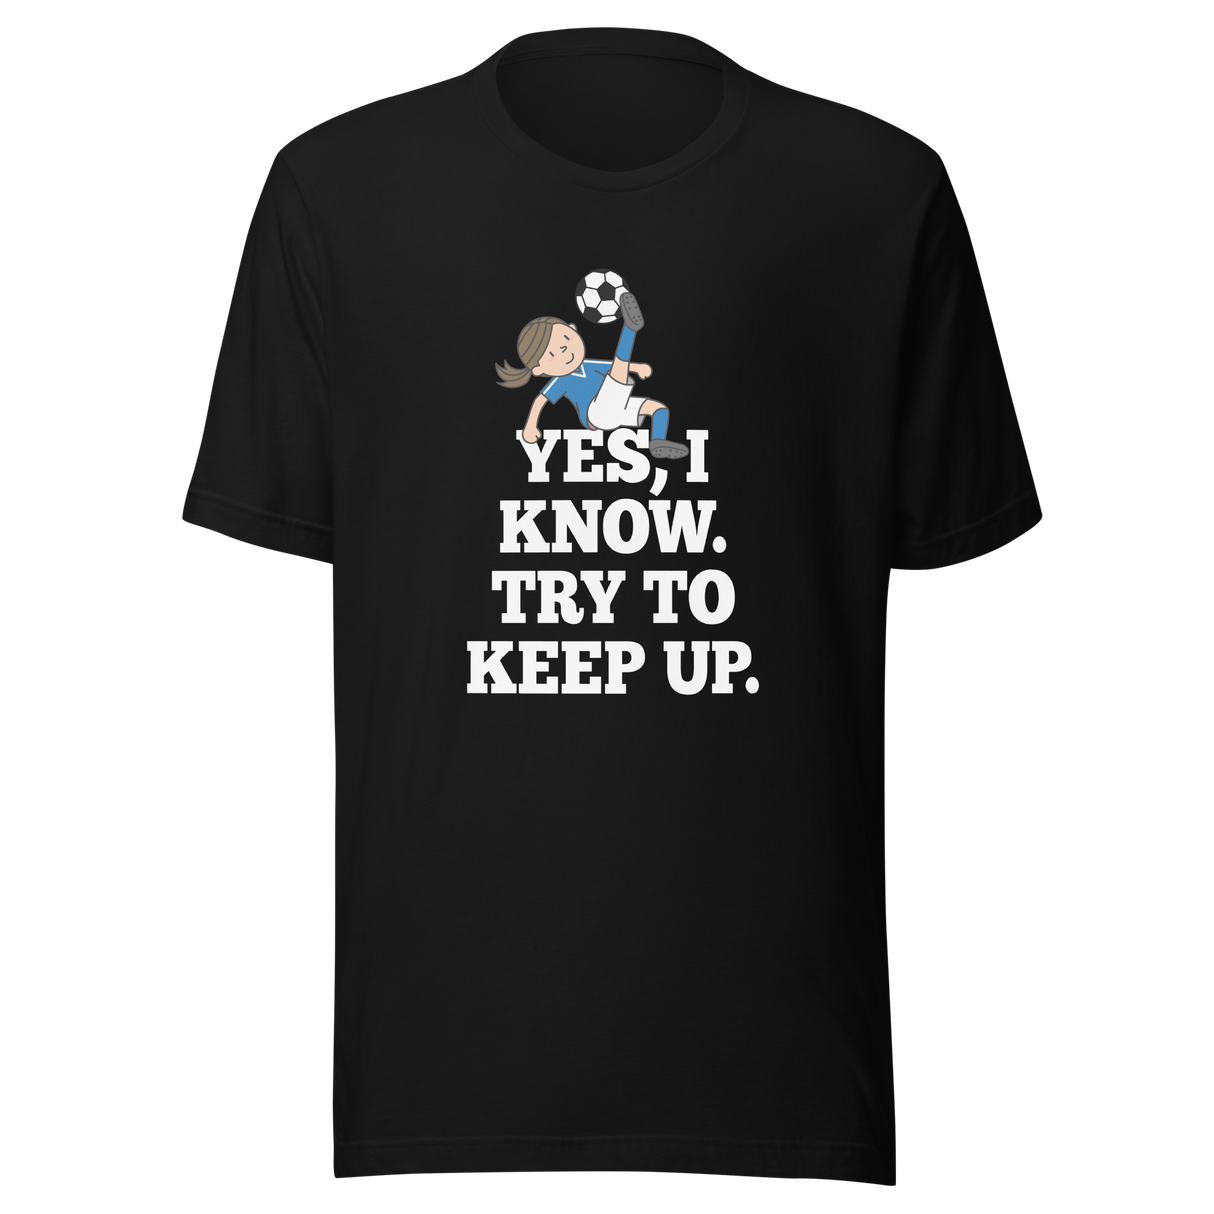 yes-i-know-try-to-keep-up-girls-tee-soccer-t-shirt-womens-tee-sports-t-shirt-soccer-tee#color_black